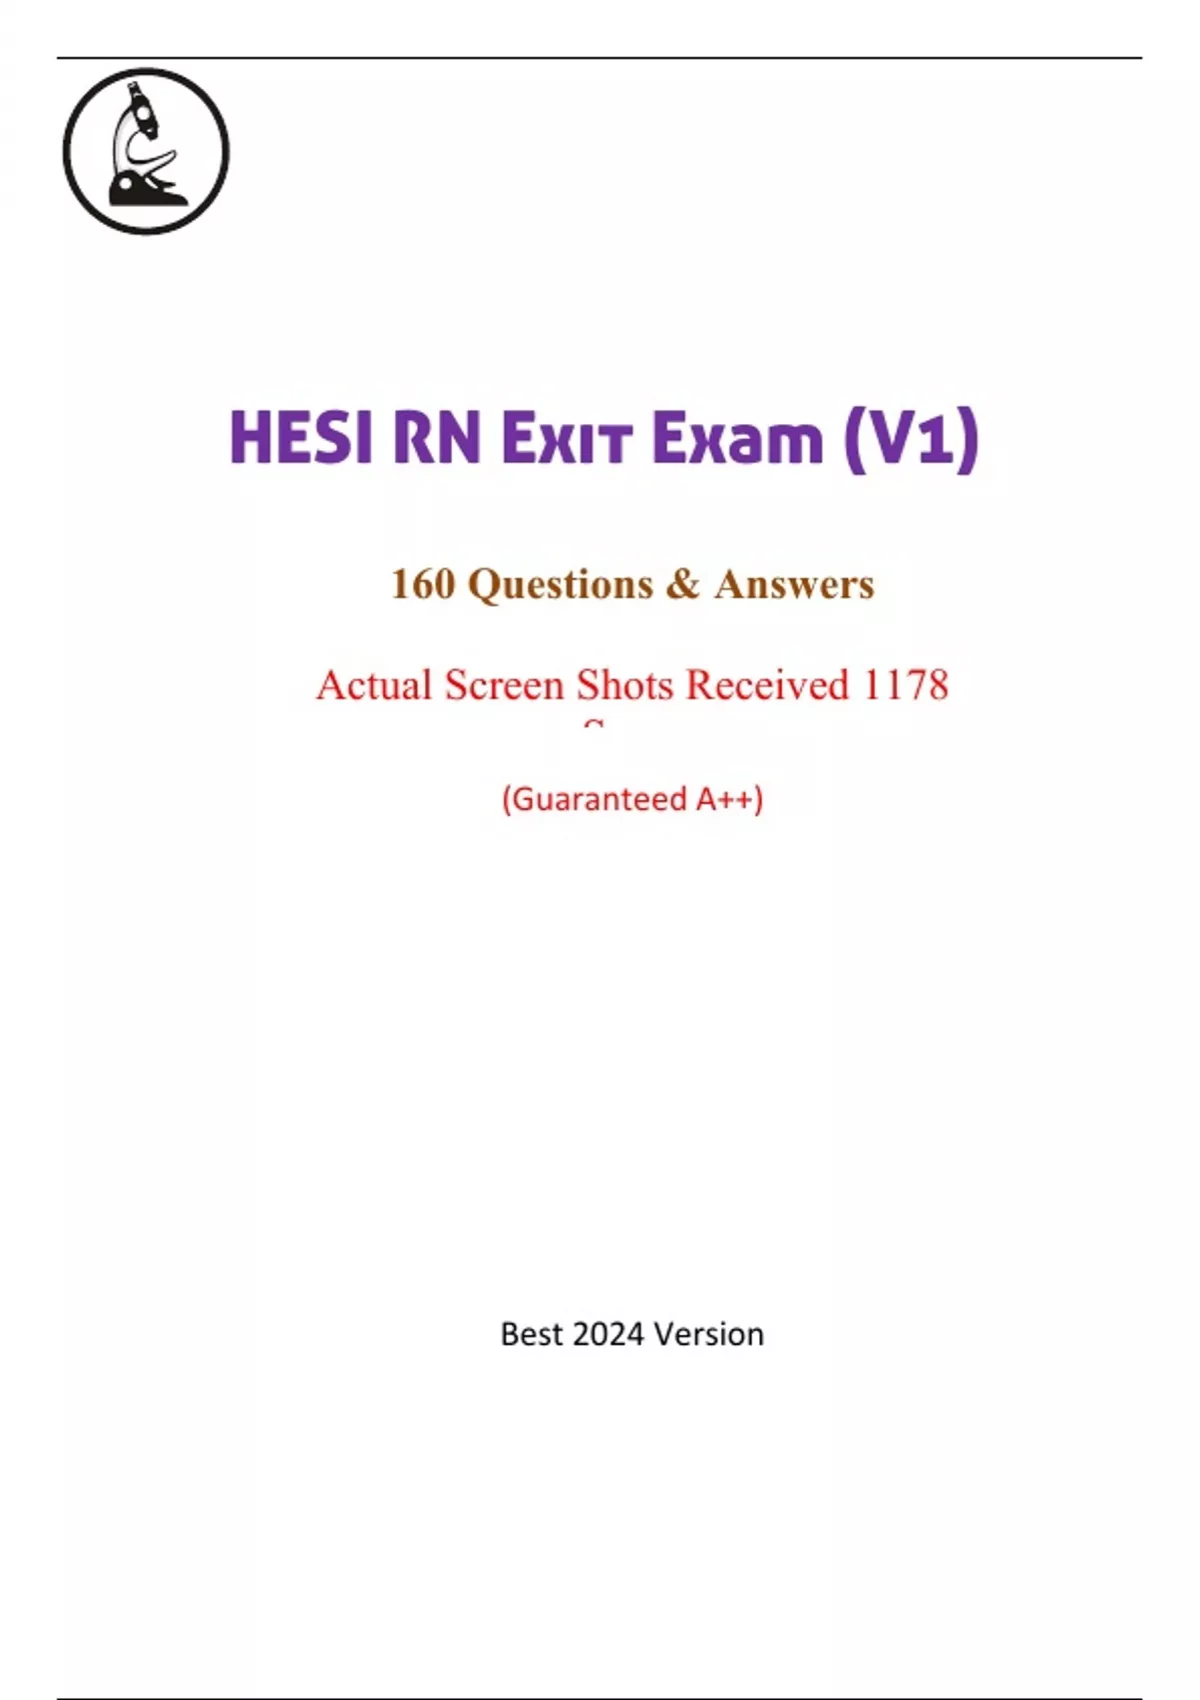 HESI RN Exit Exam (V1) 160 Questions & Answers (Guaranteed A+